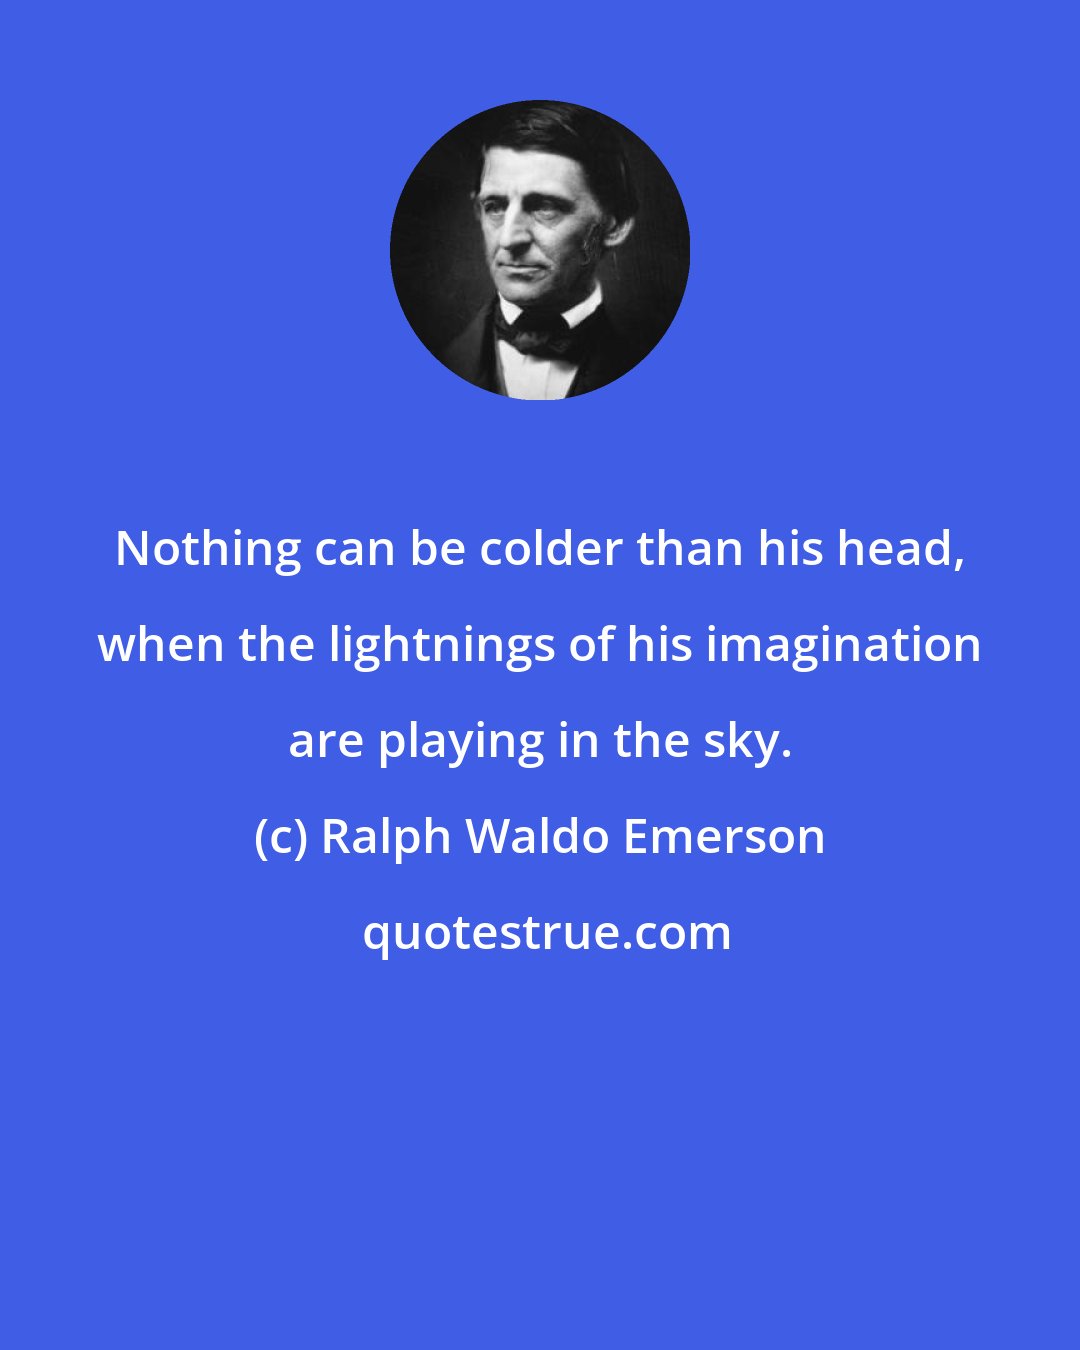 Ralph Waldo Emerson: Nothing can be colder than his head, when the lightnings of his imagination are playing in the sky.